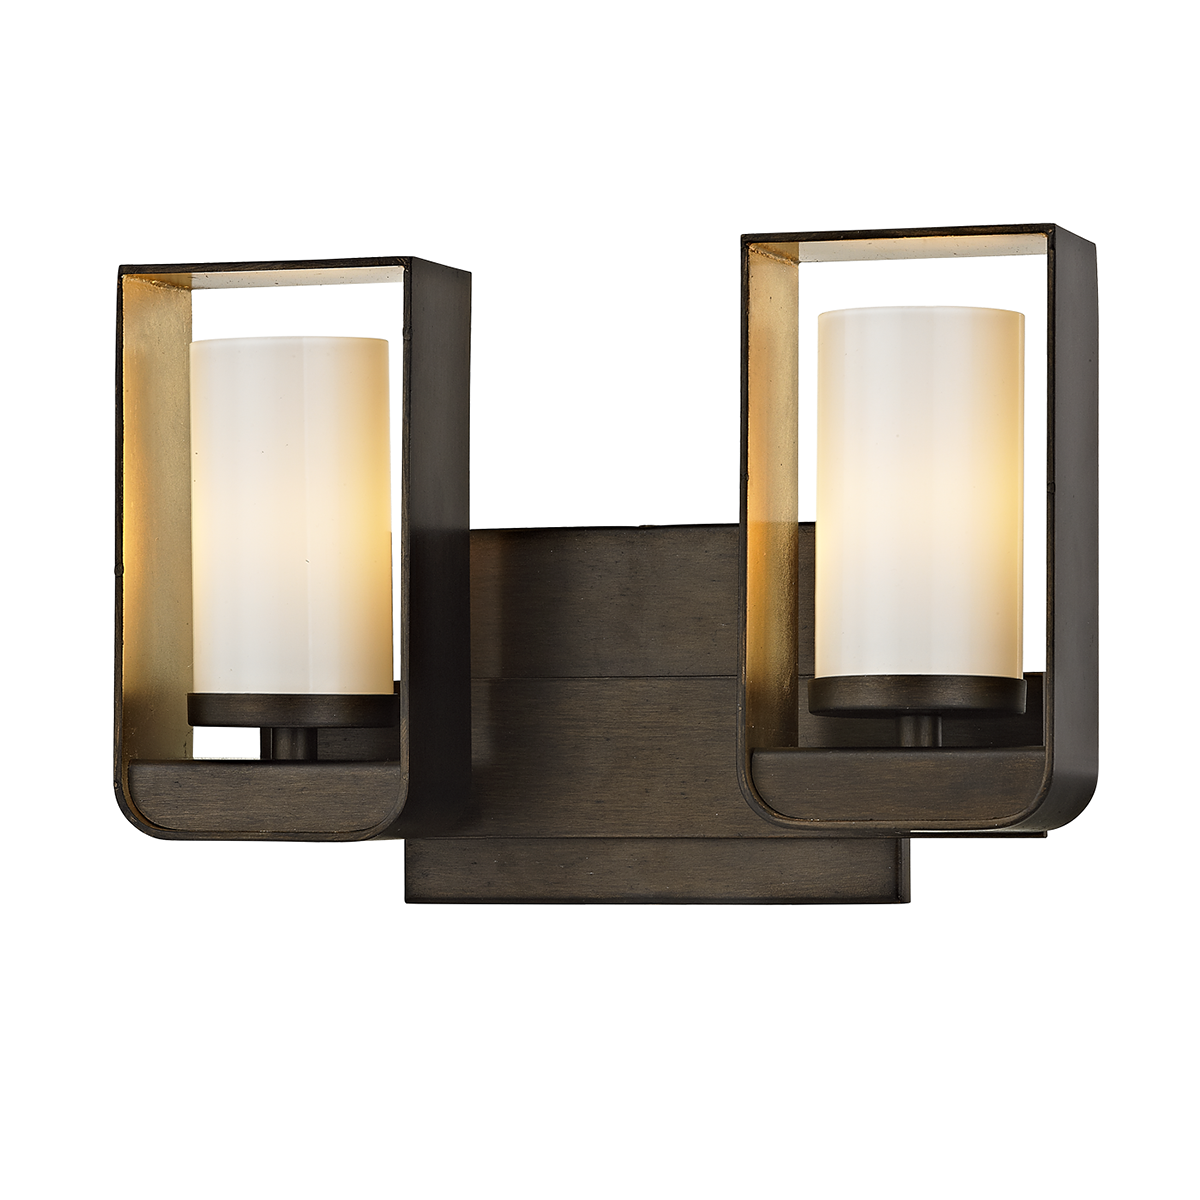 Troy Lighting Escape Bath and Vanity Bath and Vanity Troy Lighting BRONZE WITH GOLD LEAF ACCENT 11.5x11.5x7.75 